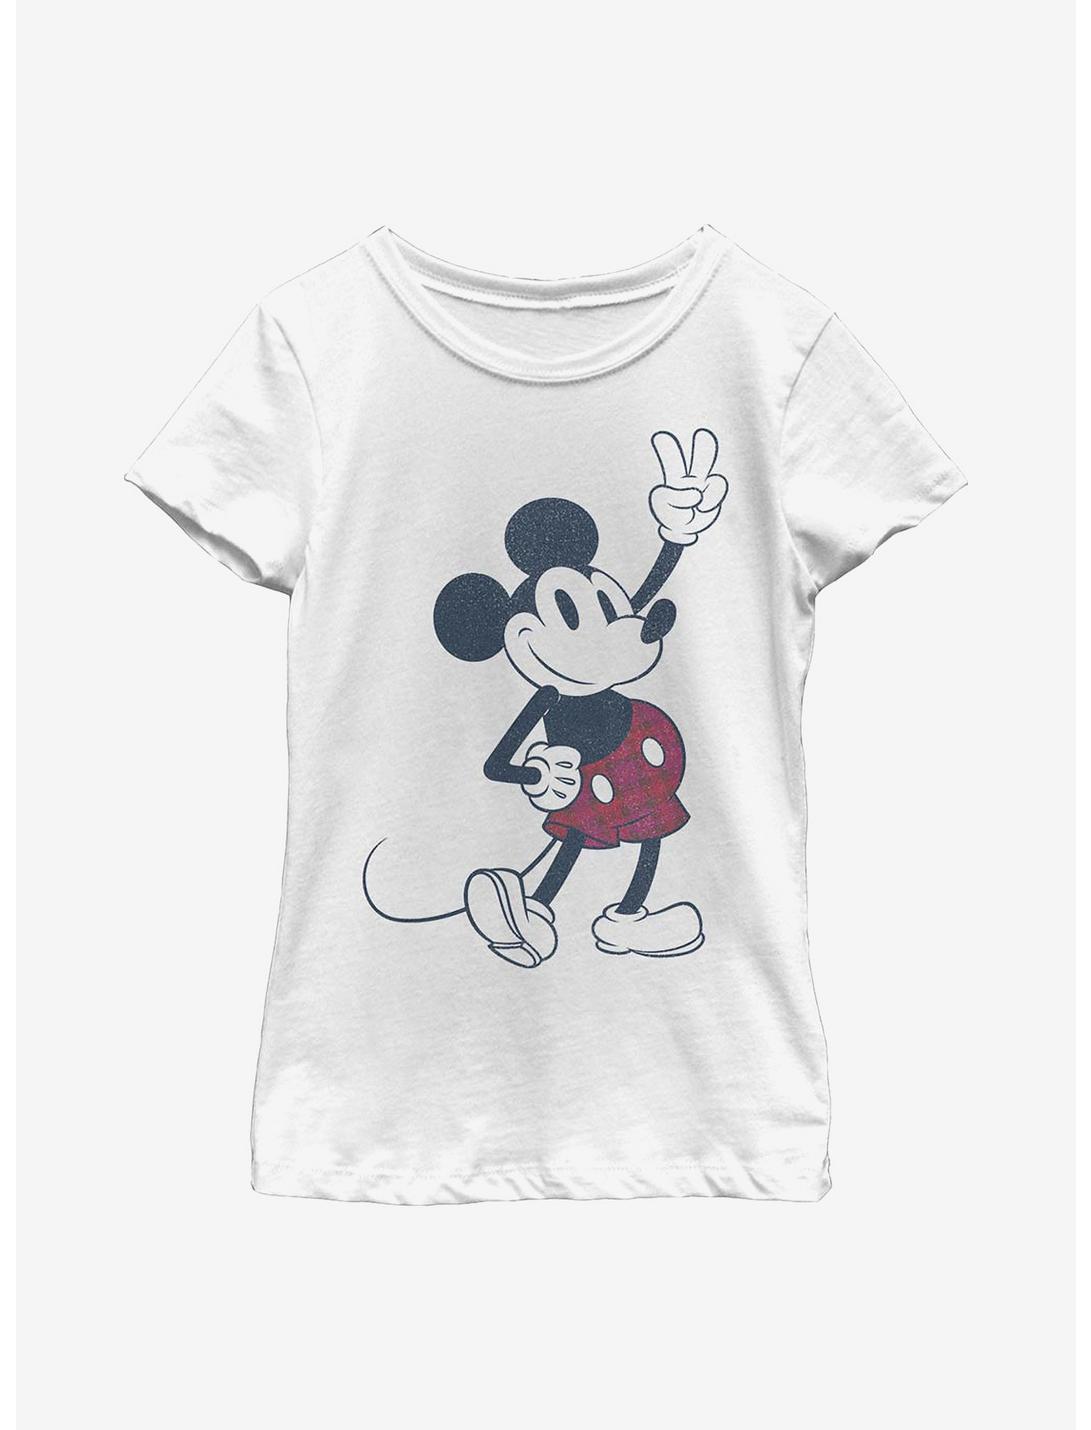 Disney Mickey Mouse Plaid Mickey Youth Girls T-Shirt, WHITE, hi-res